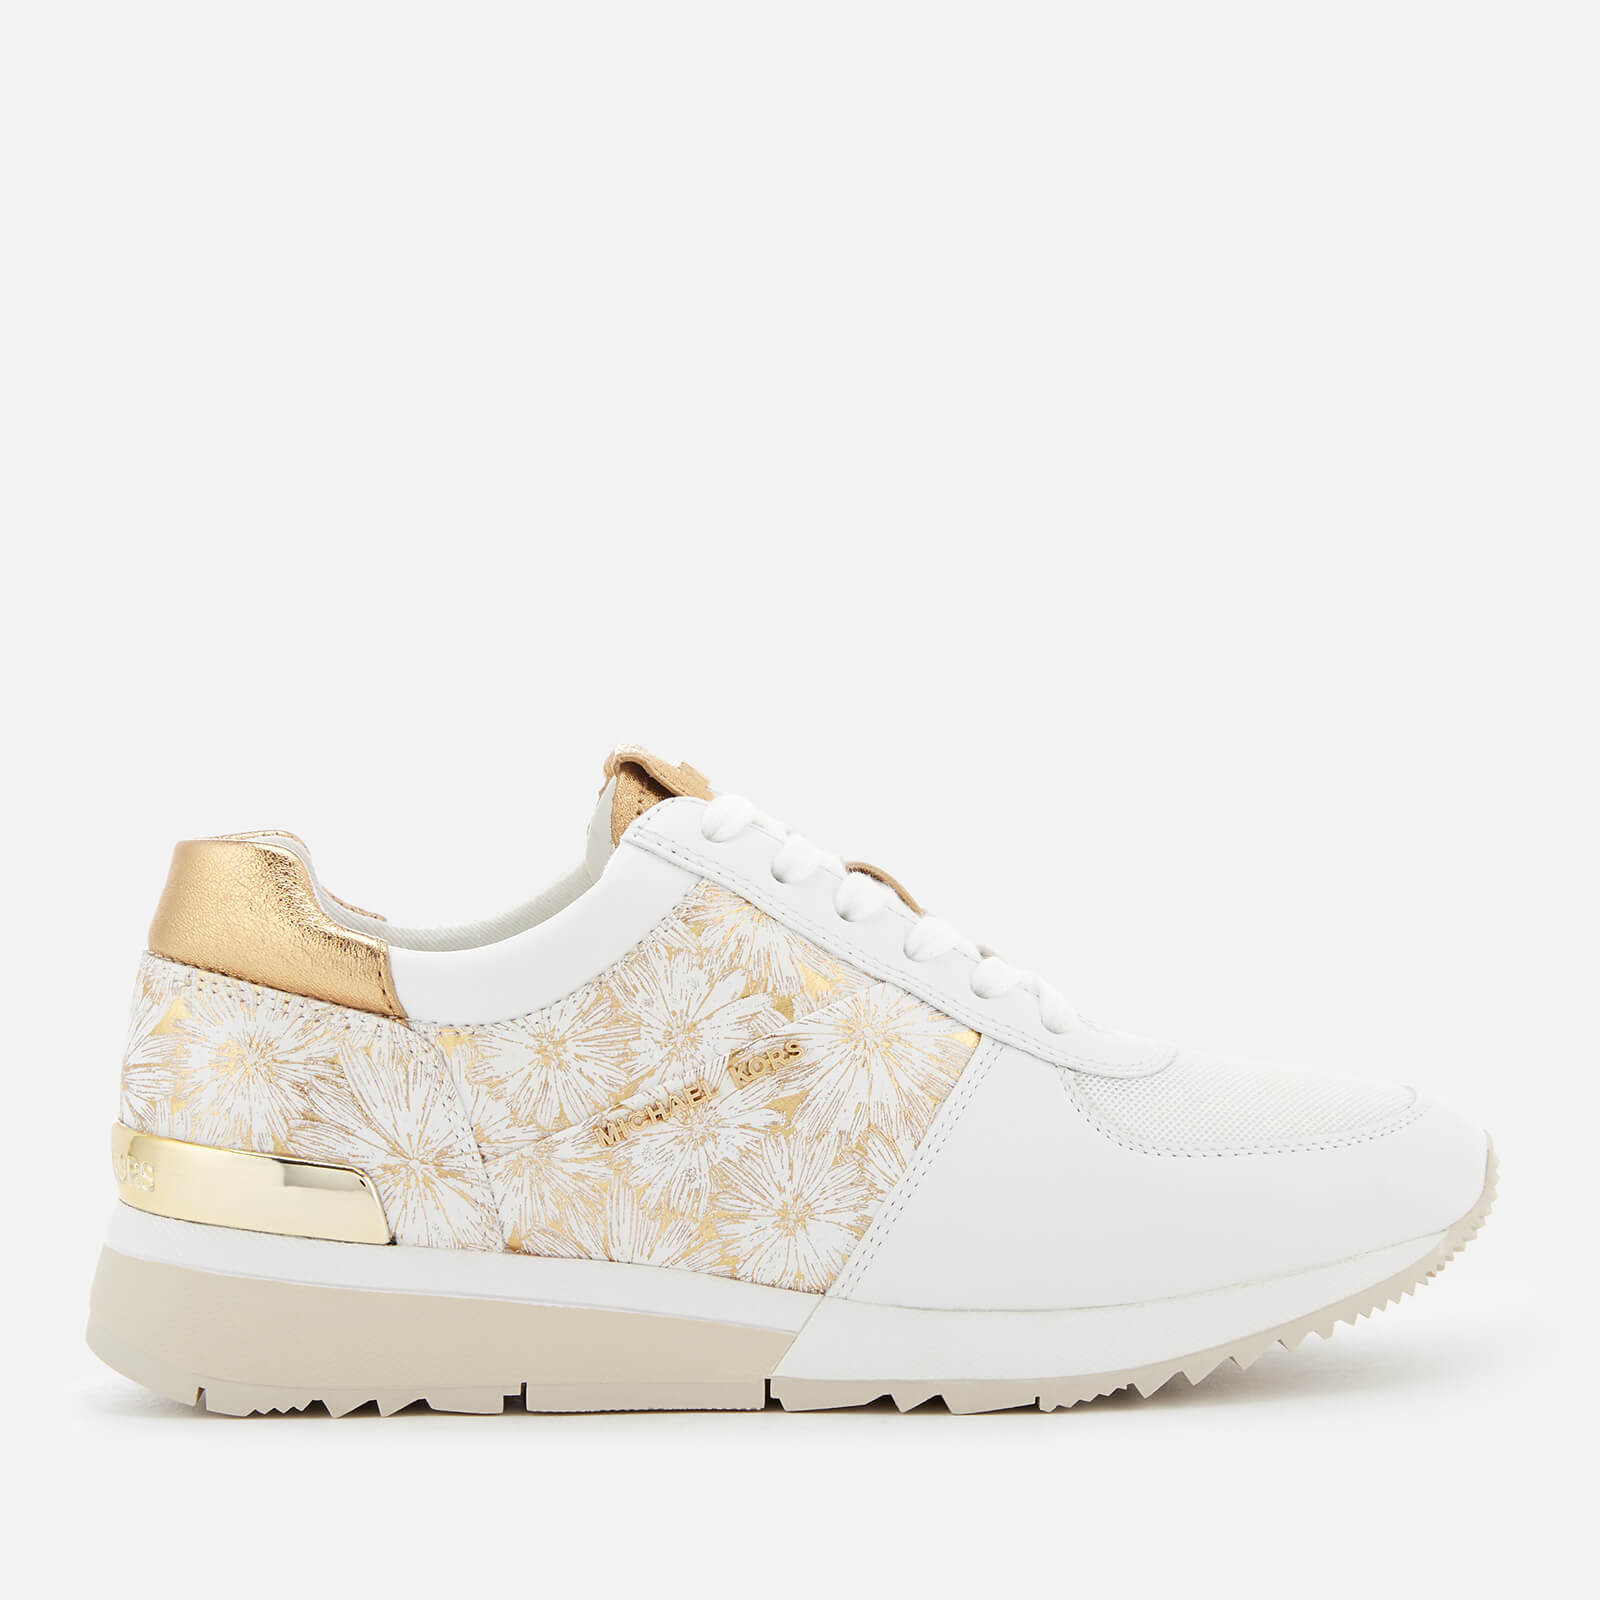 white and gold michael kors shoes